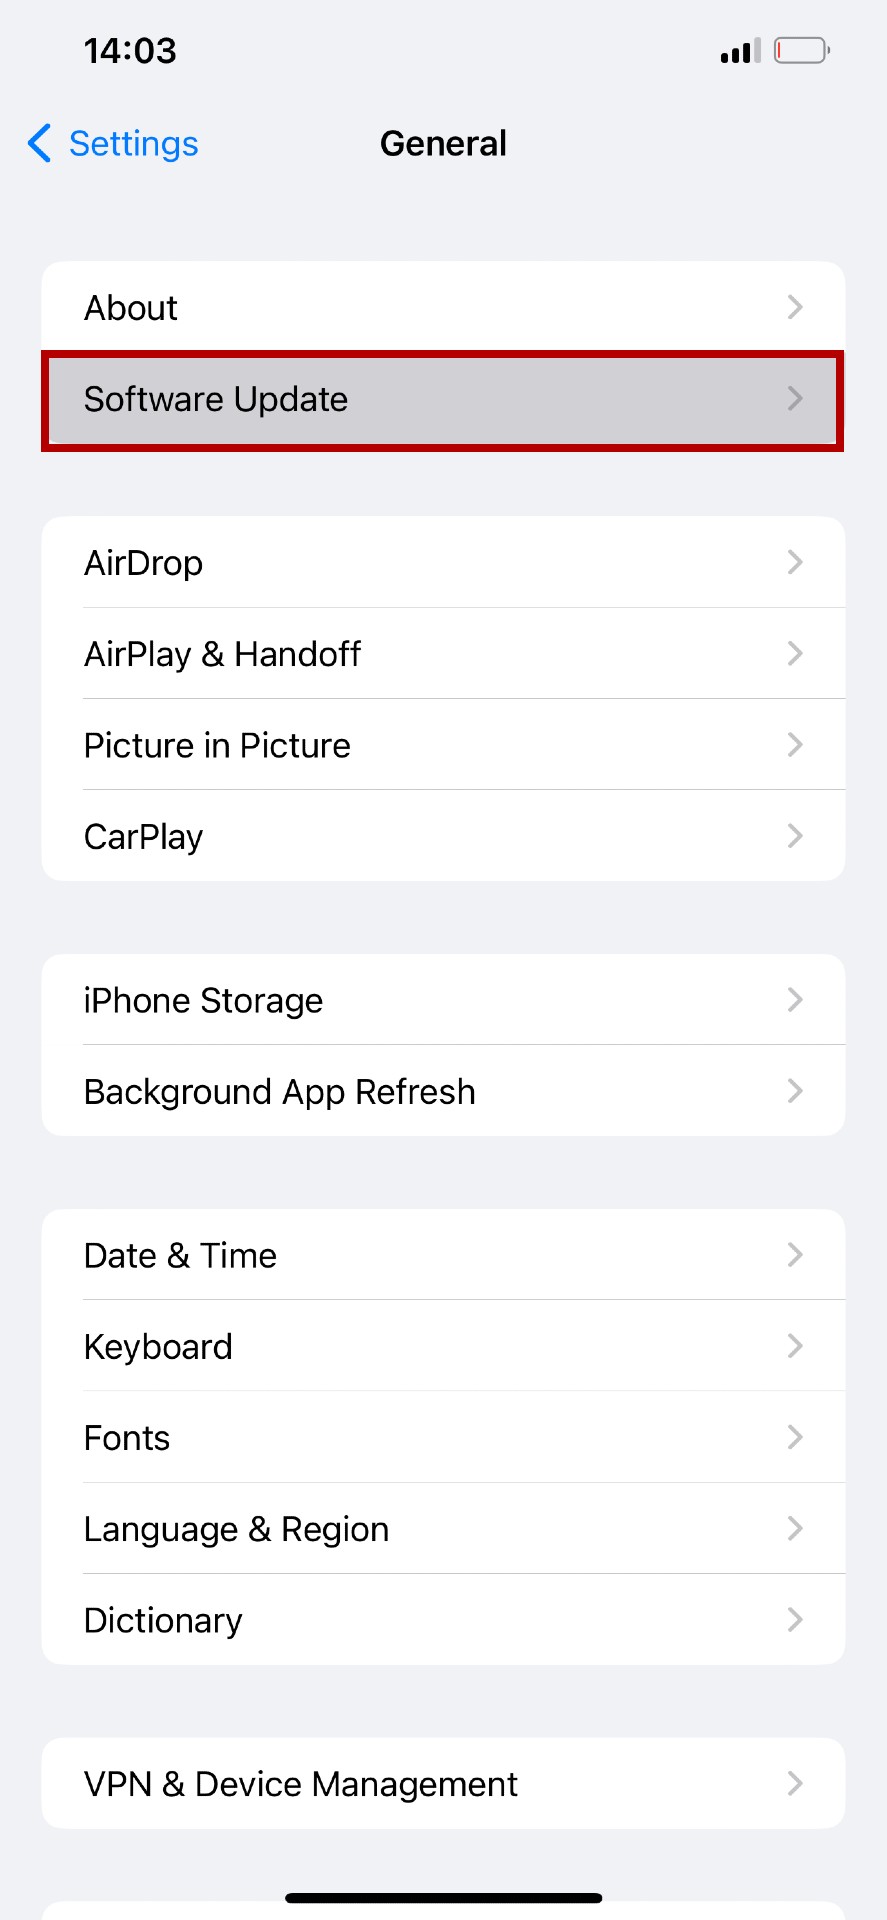 The iOS General settings page